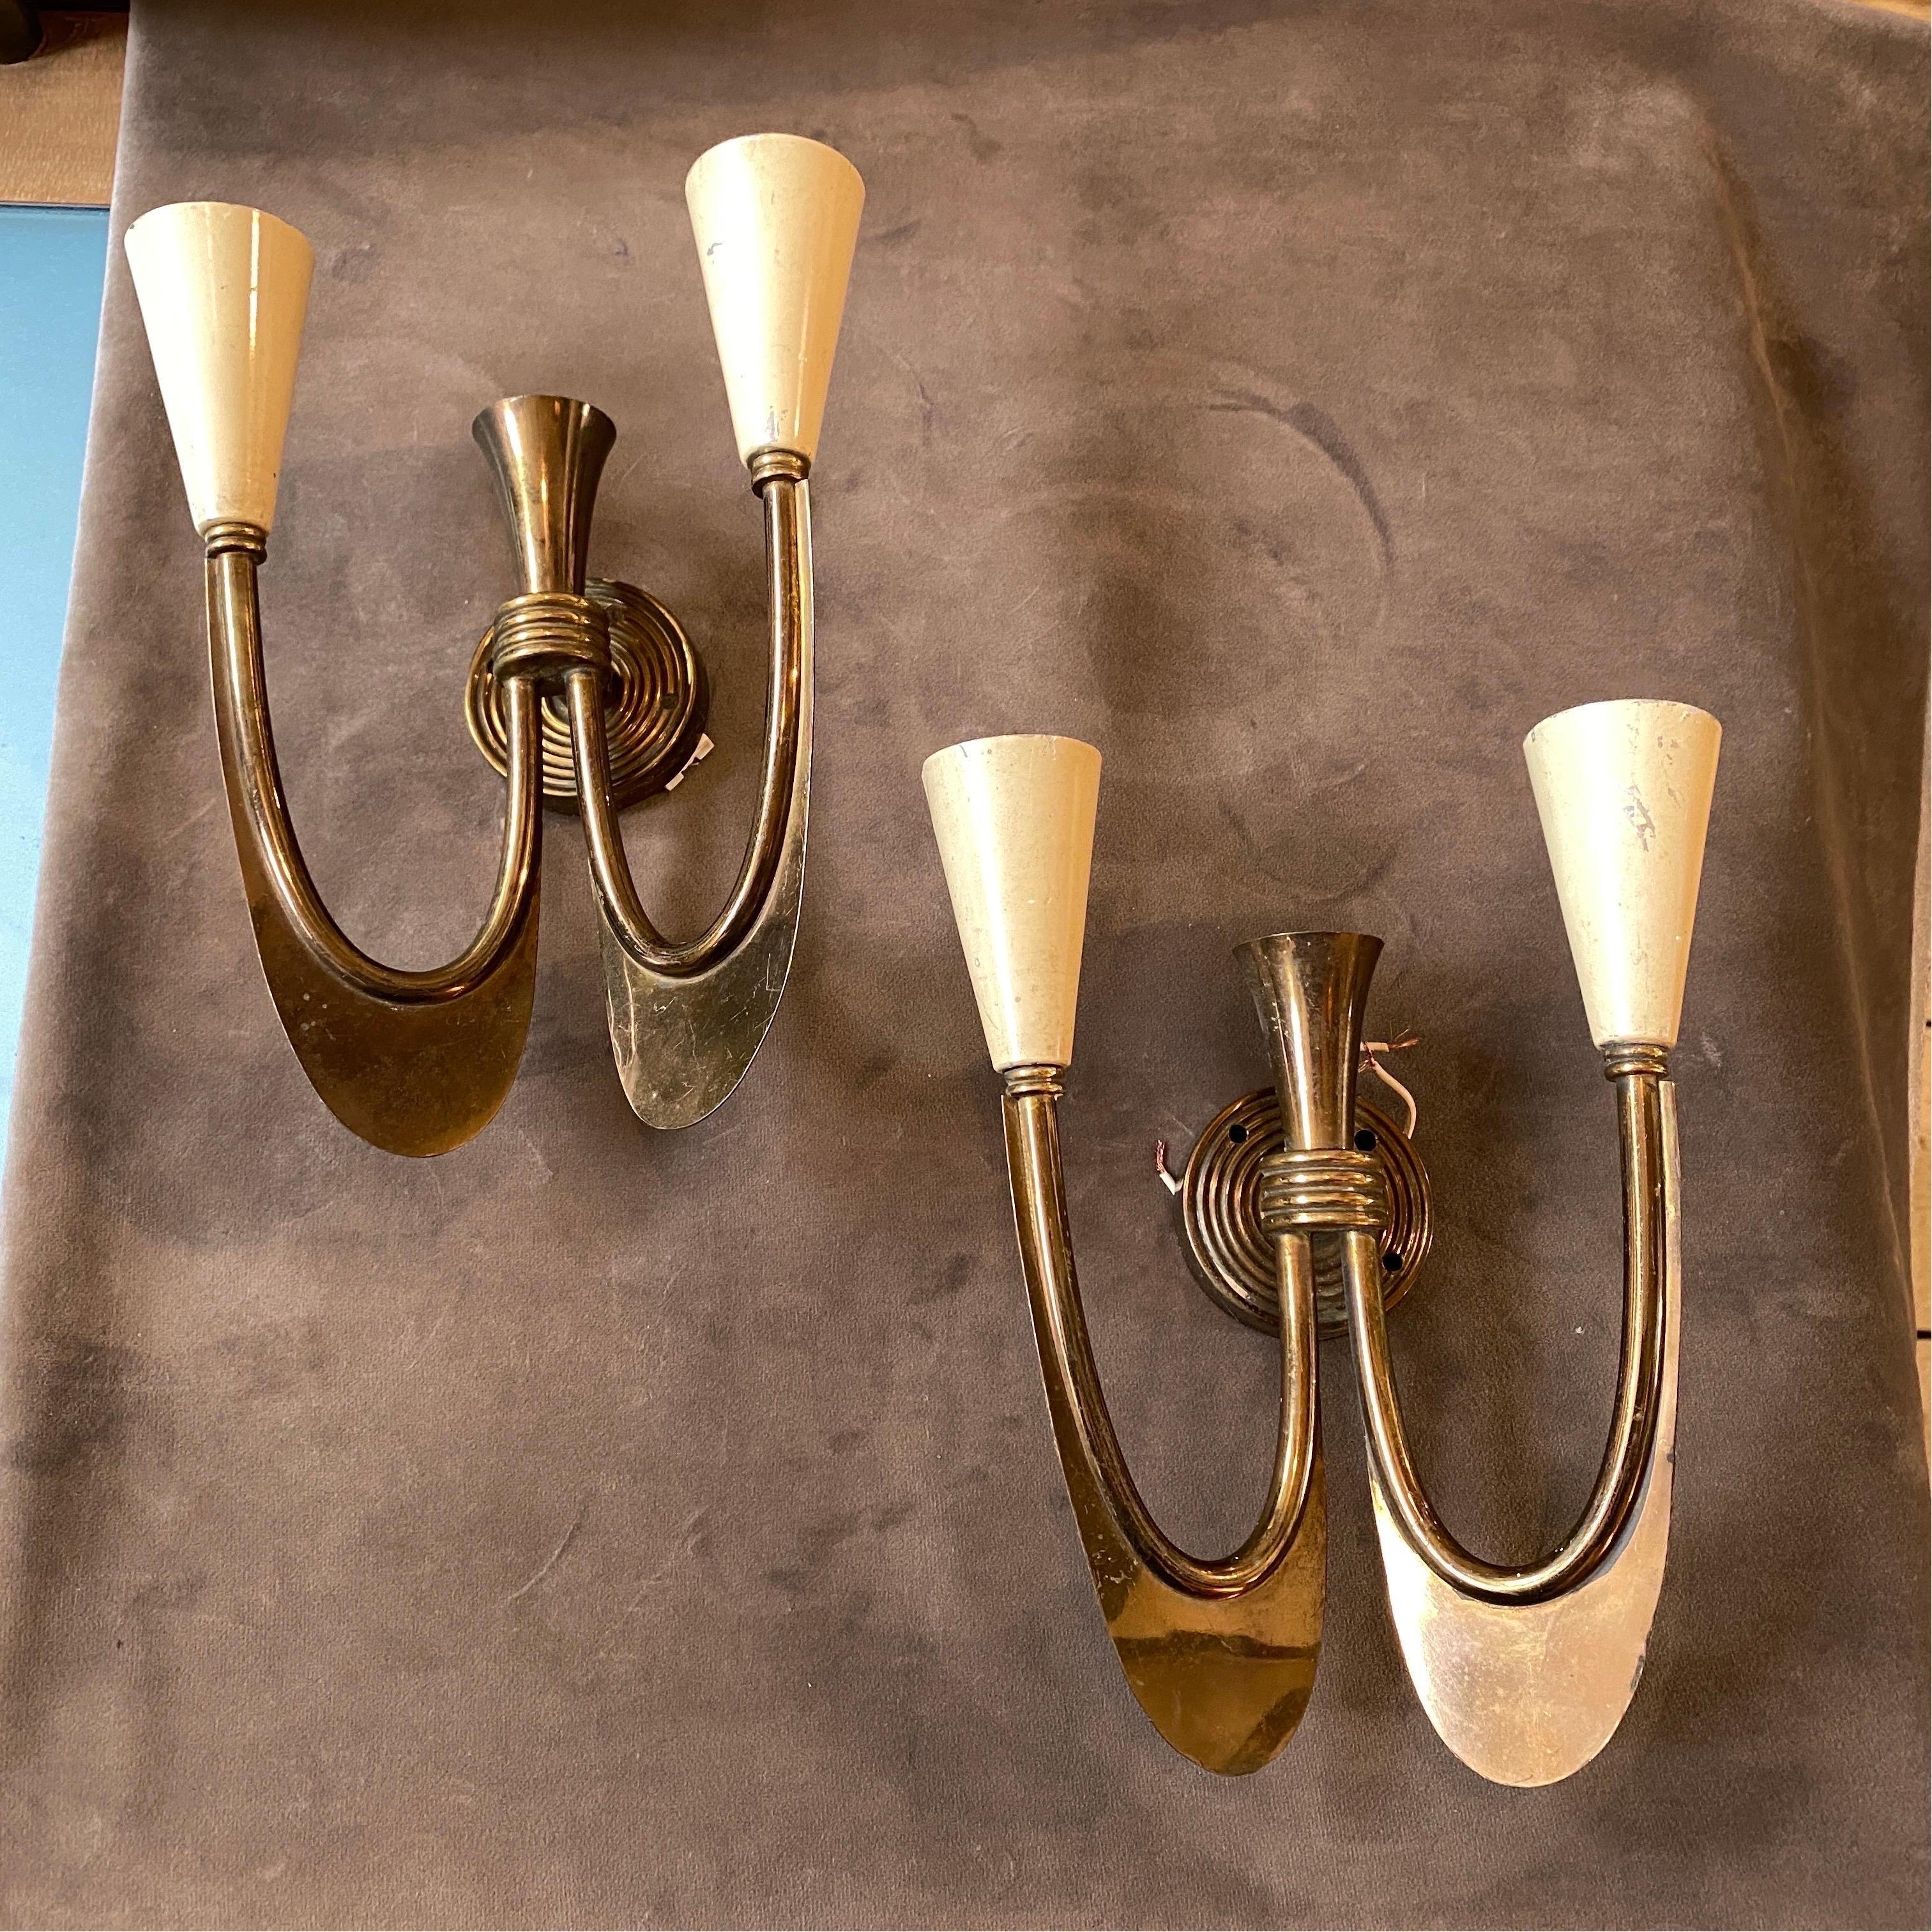 A pair of stylish Art Deco brass wall scones made in Italy in Thirties, brass it's in original patina, the two white diffusors need regular e14 bulbs, they work both 110-240 volts.